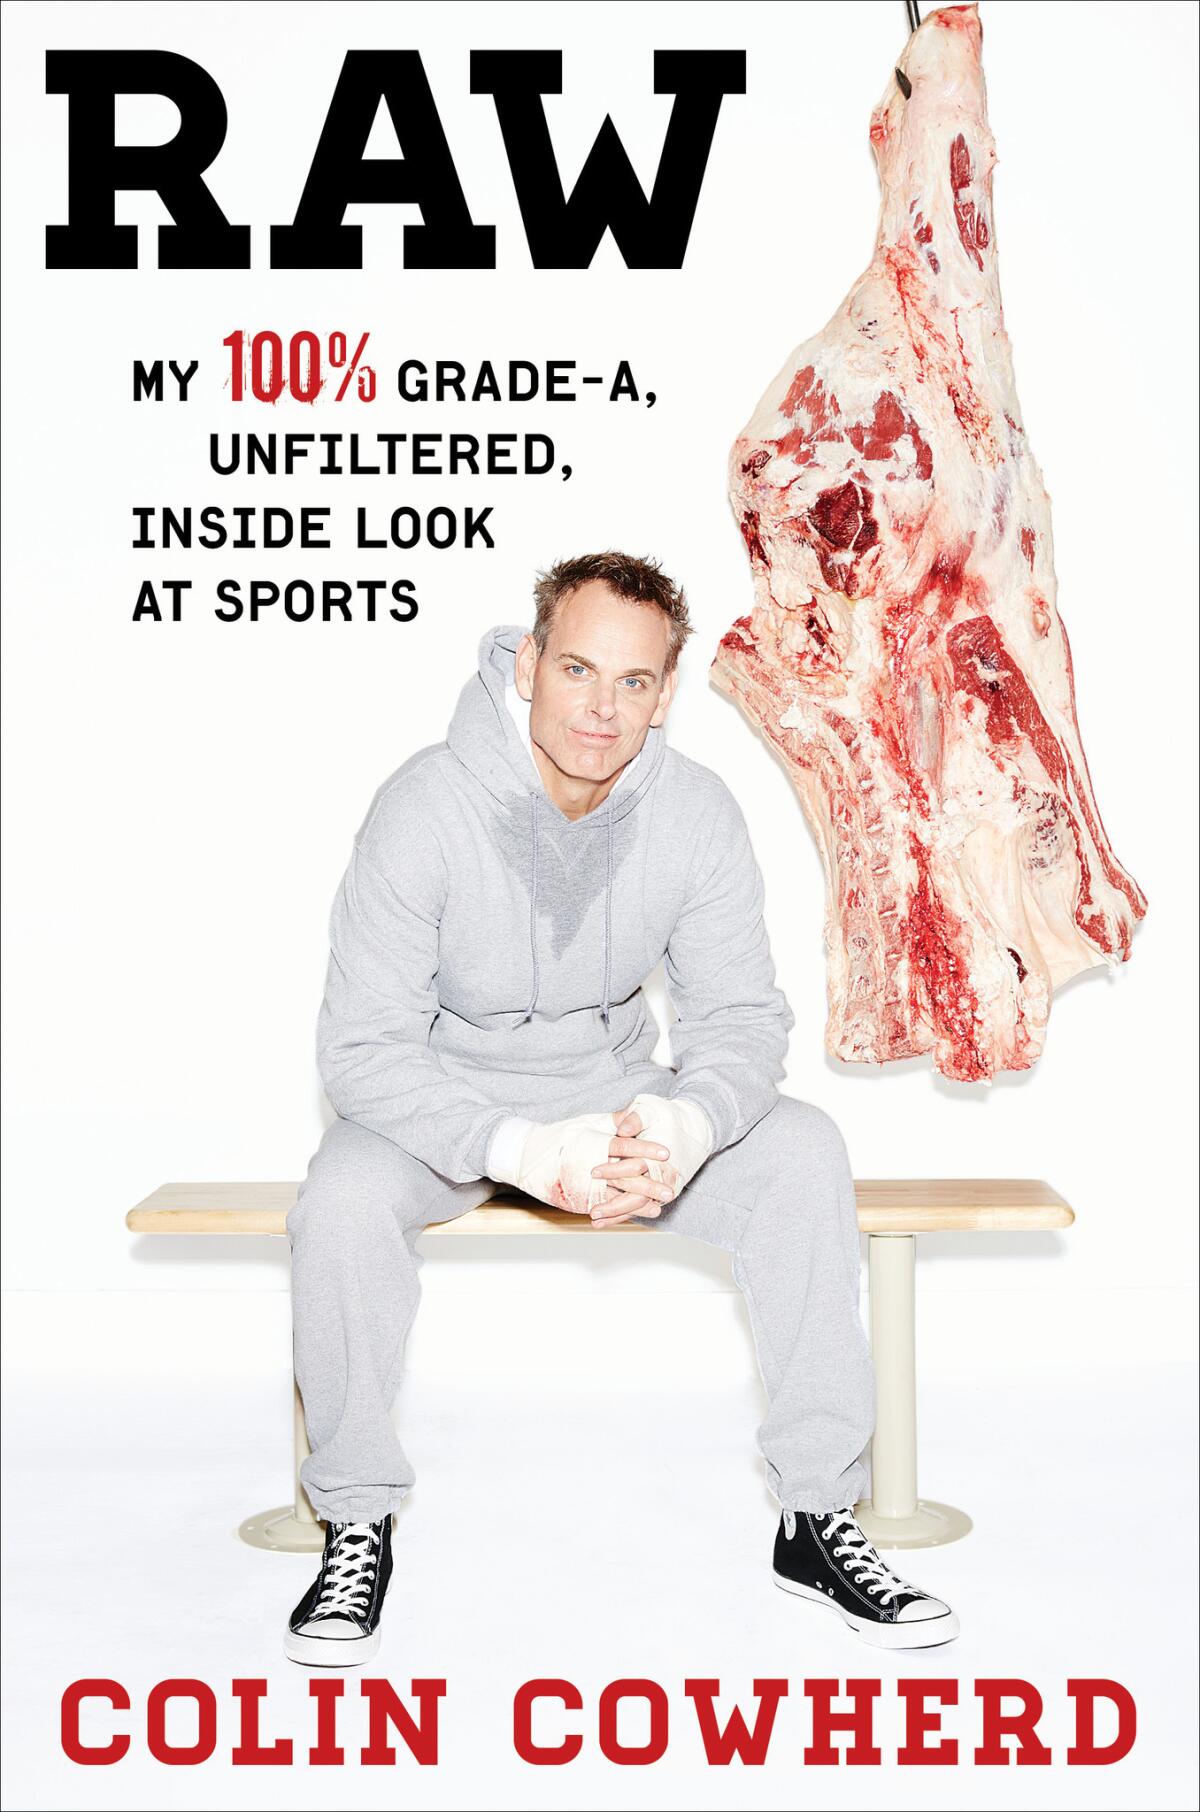 "Raw: My 100% Grade-A, Unfiltered, Inside Look at Sports" by Colin Cowherd